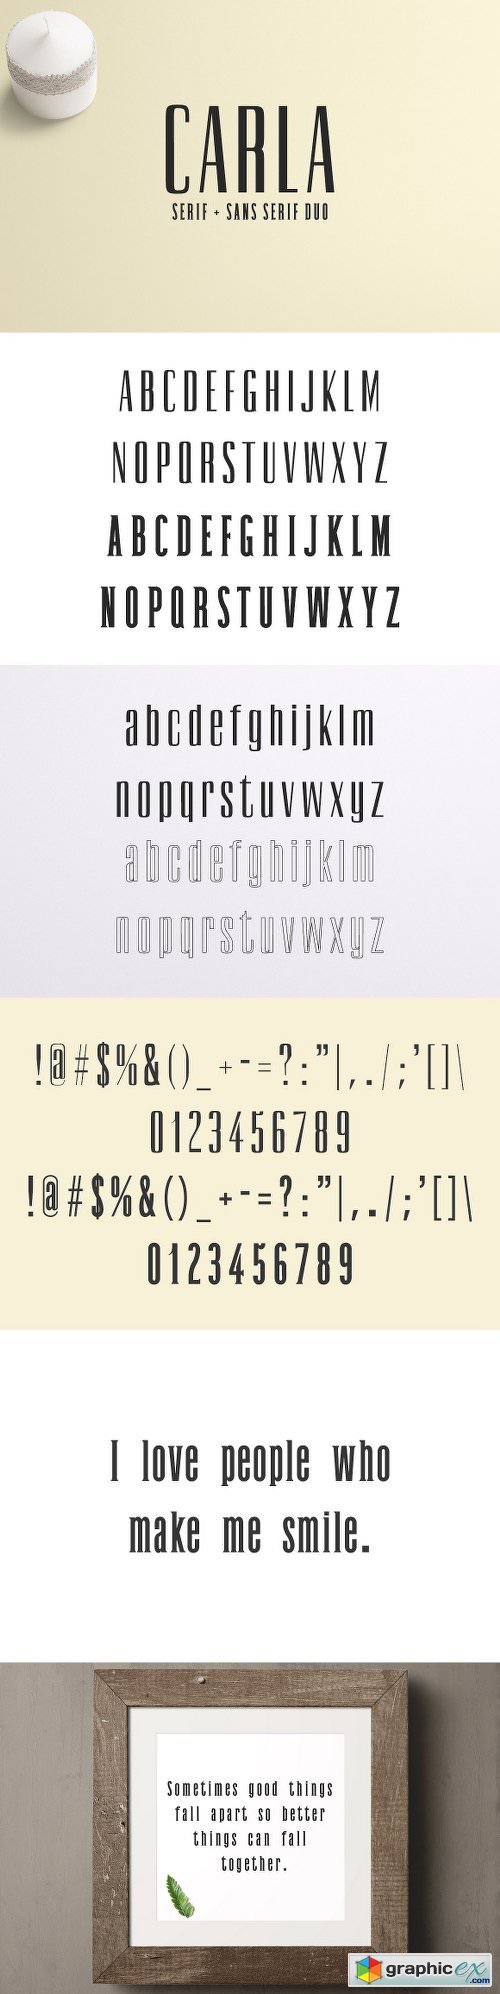 Carla Duo 8 Font Family Pack